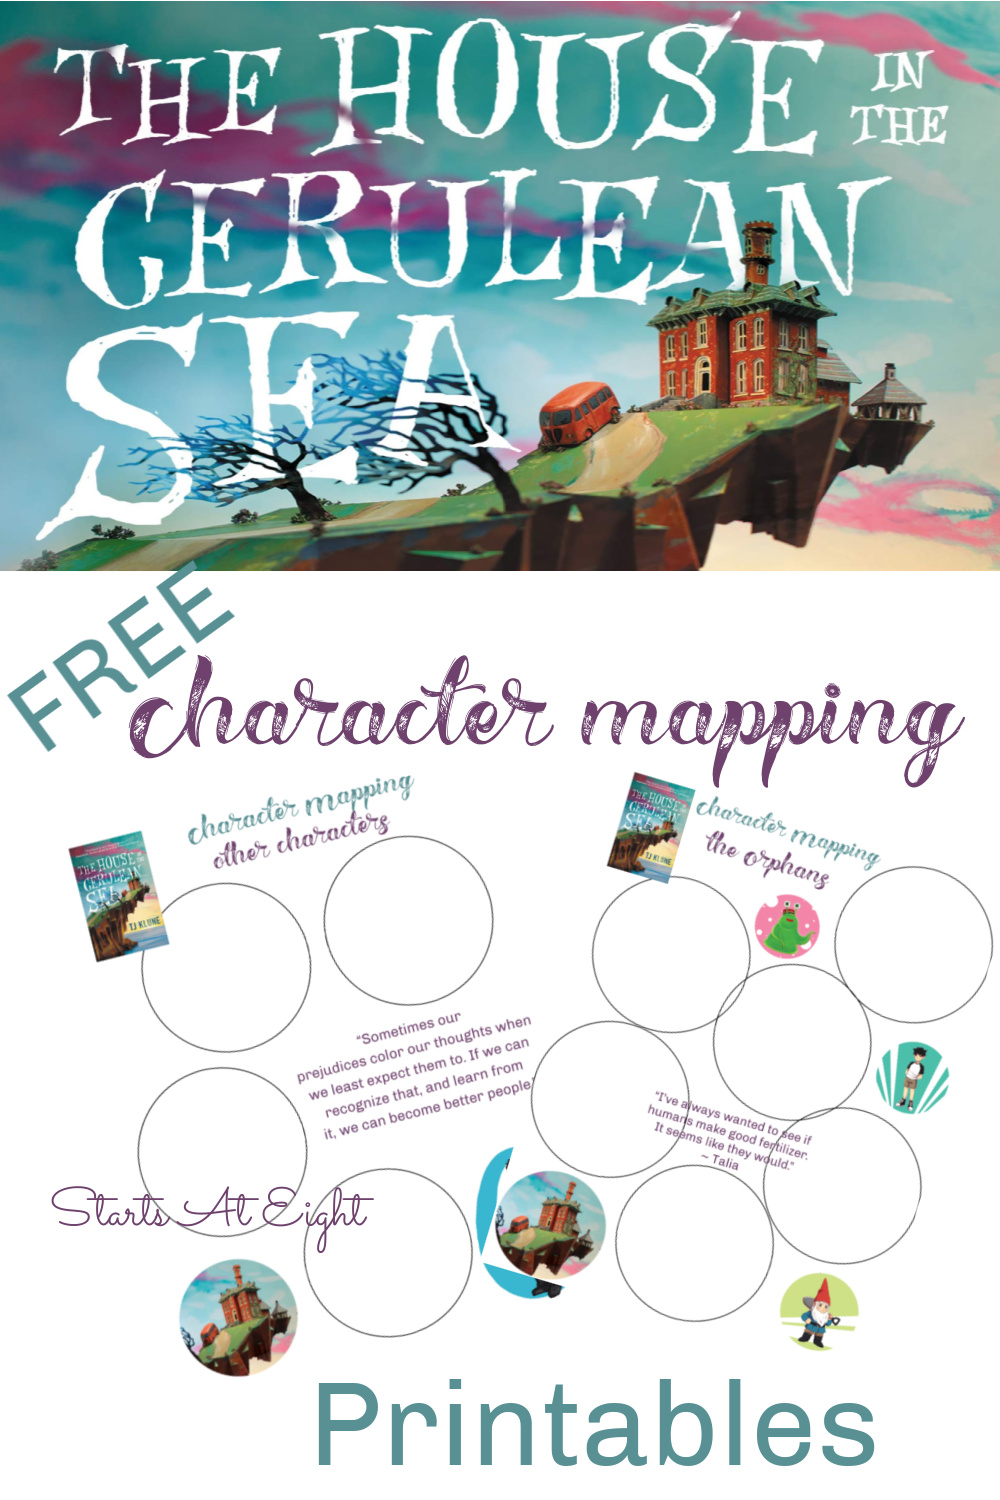 The House in the Cerulean Sea Character Mapping includes a summary, character lists, and free printable character mapping pages for use with the book. A freebie from Starts At Eight.